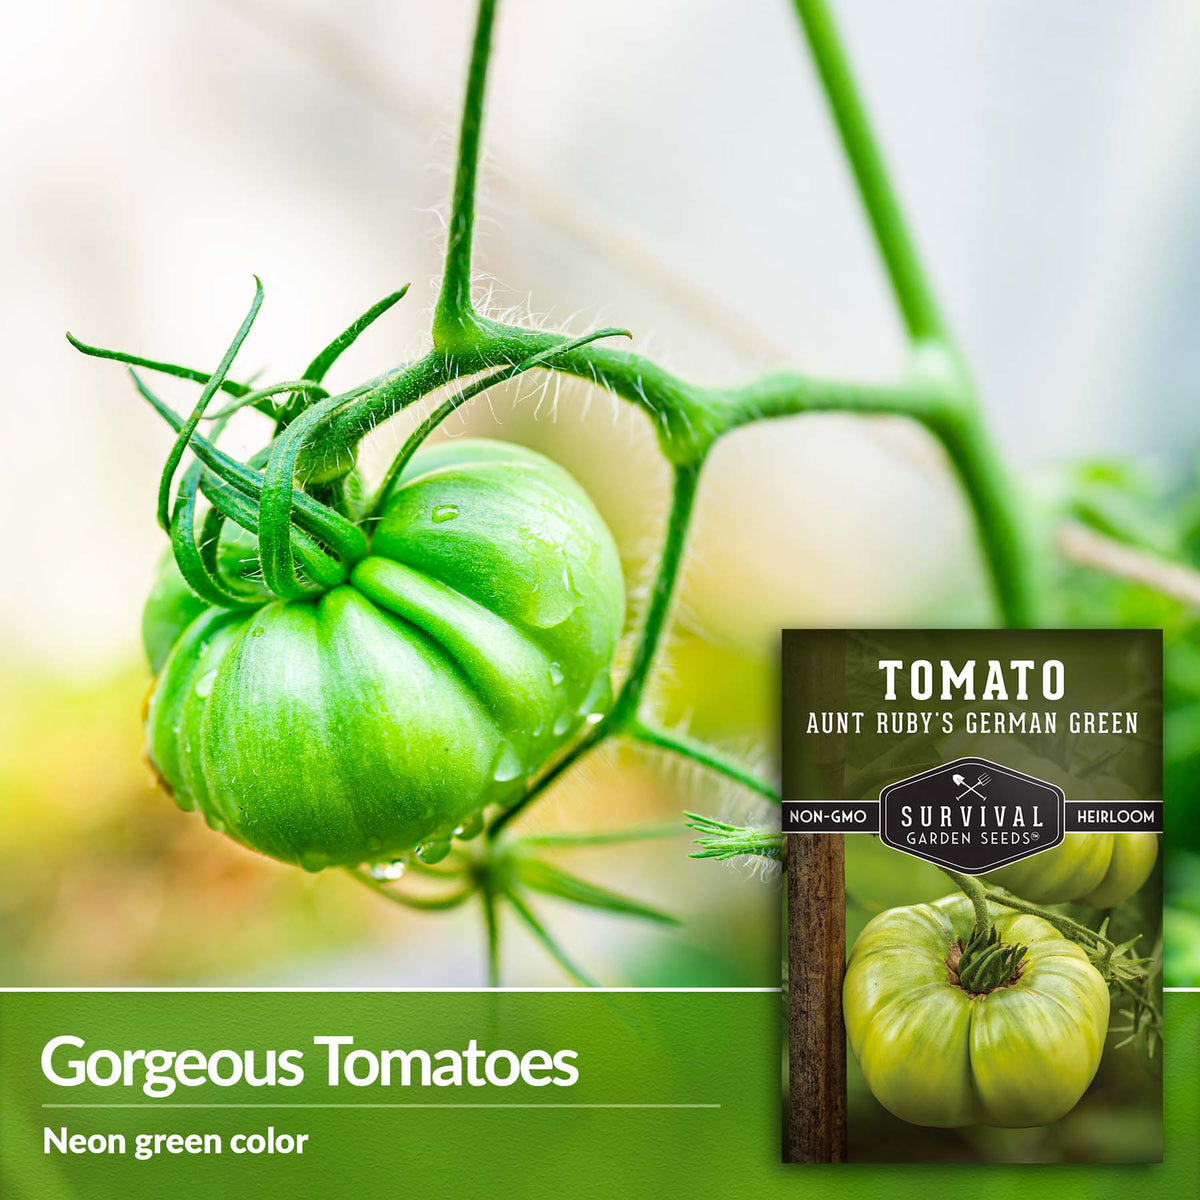 Aunt Ruby&#39;s German Green Tomatoes are a bright neon green color